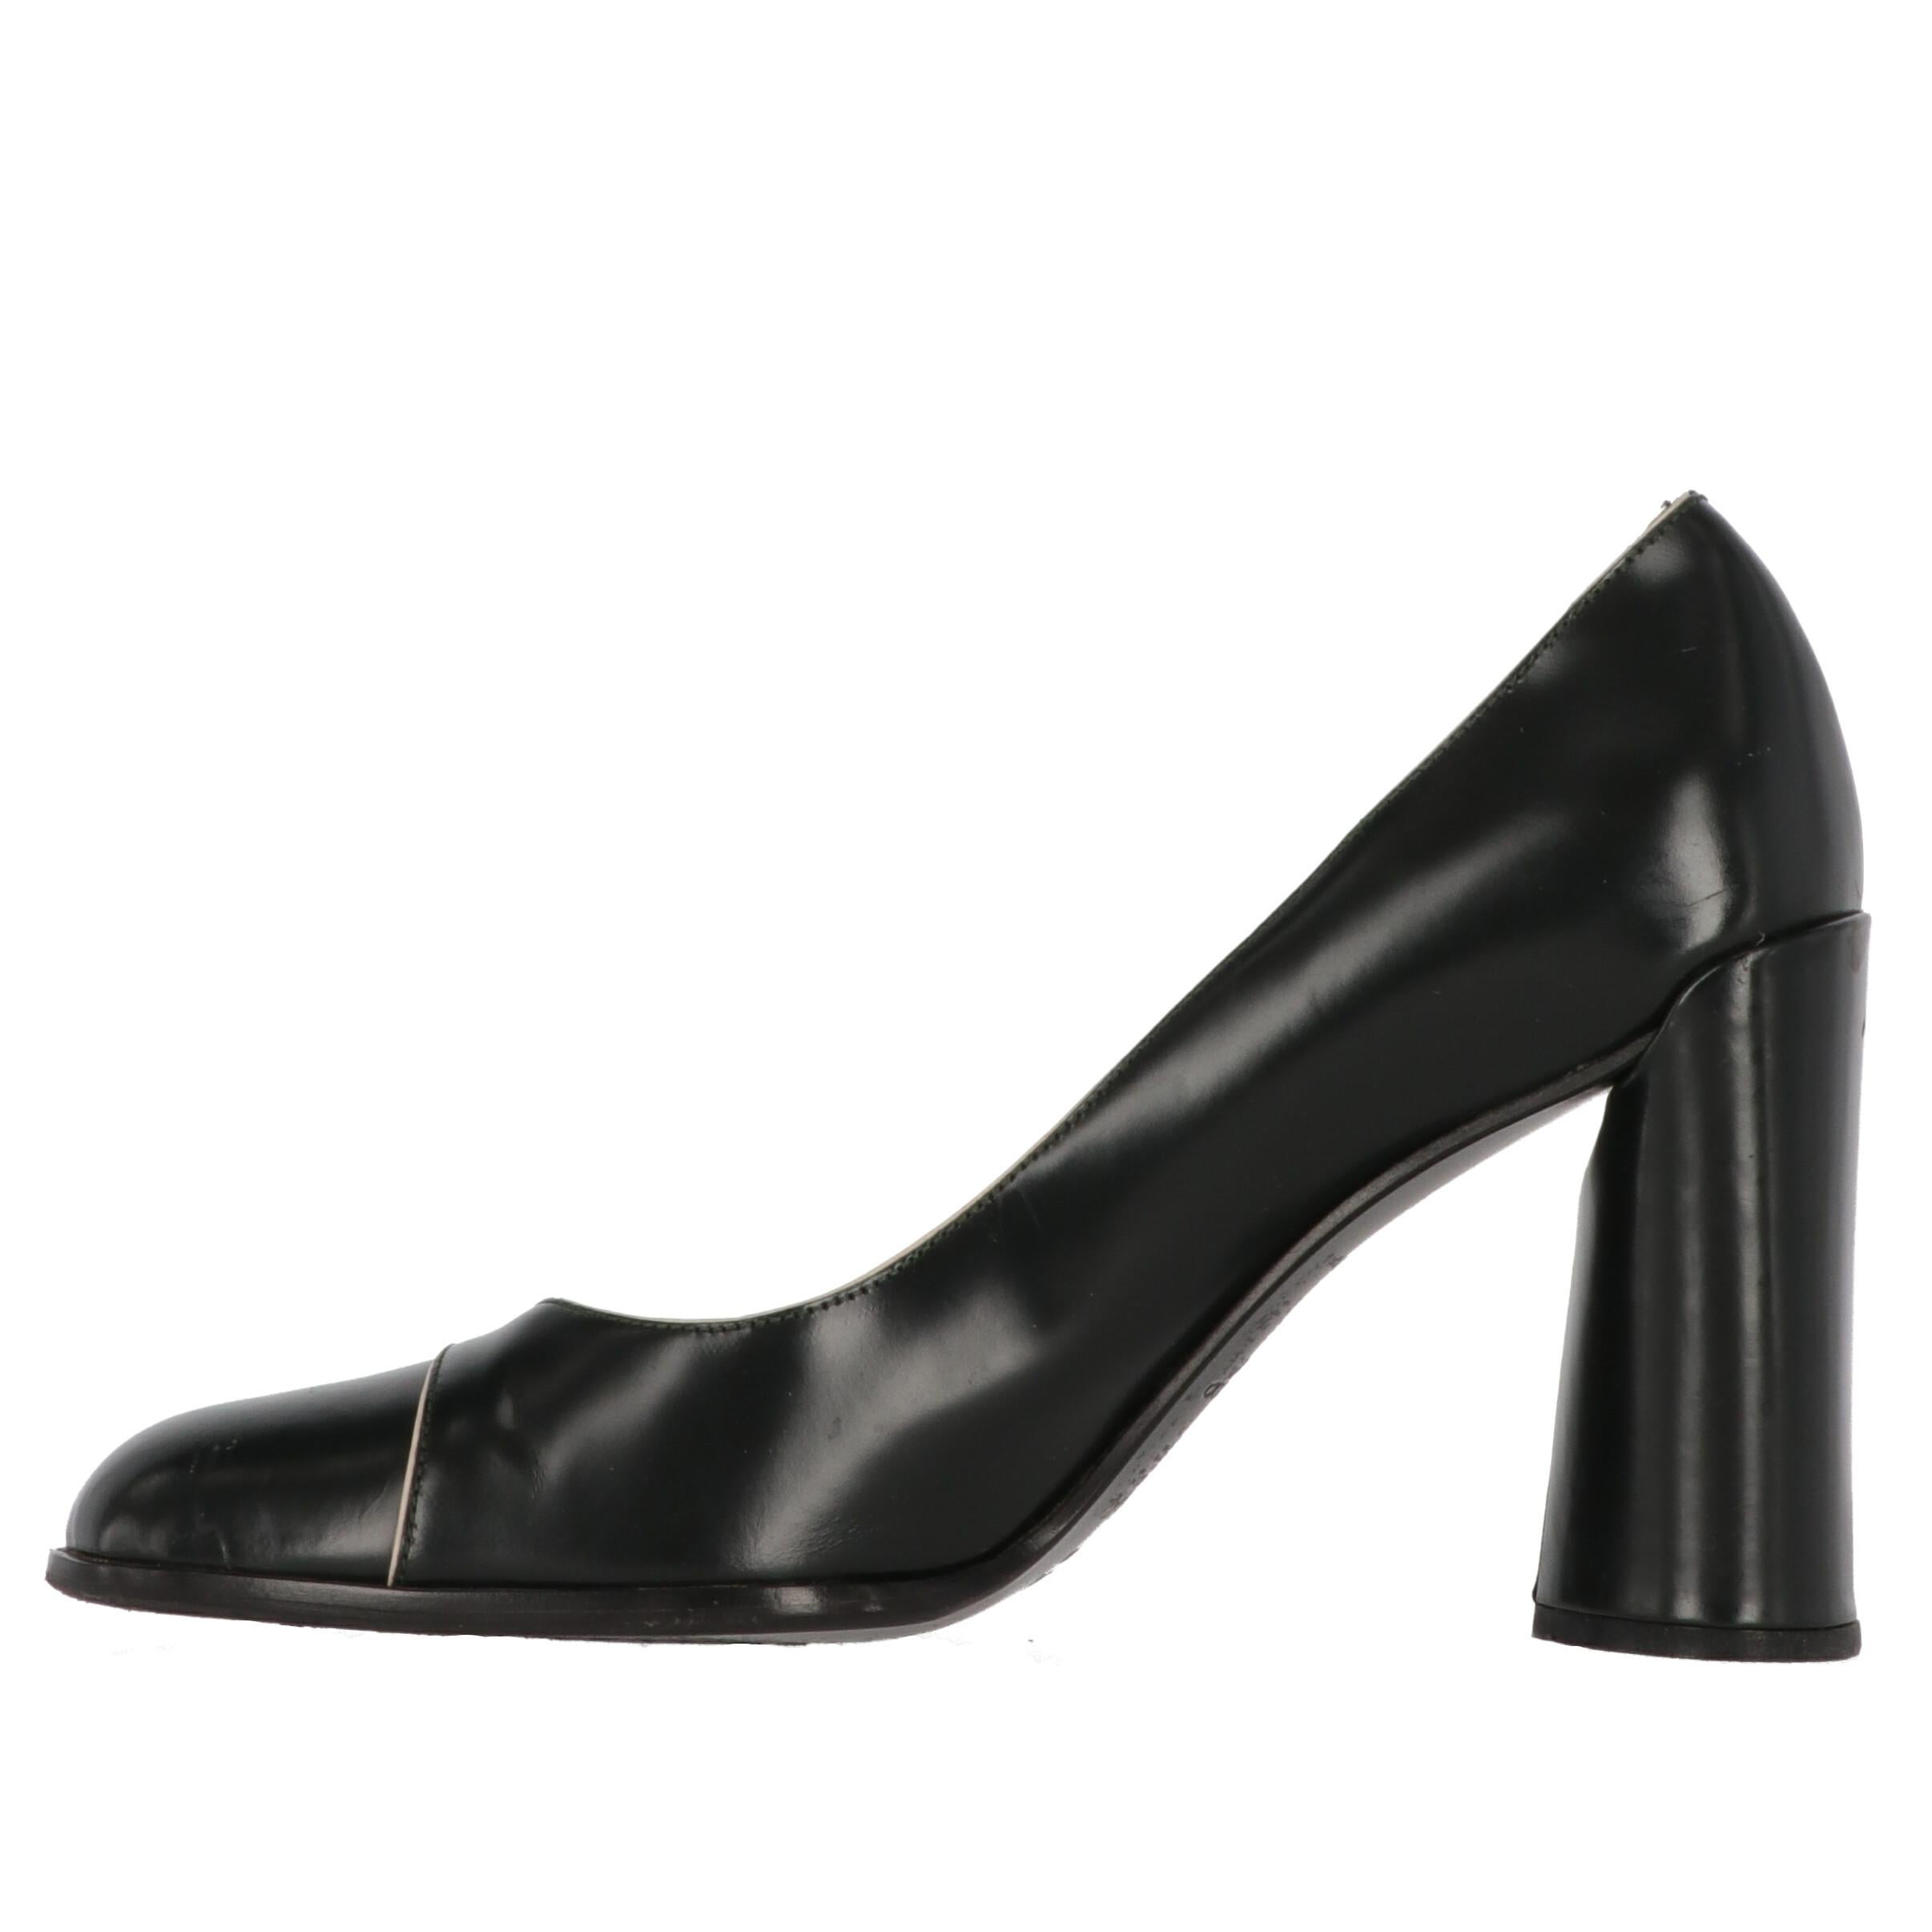 Classy and minimal shoes in the style of Prada, these black leather pumps with white contrasting thin hems. Round thick heel, cap toe stitching and round toe. 
Item shows signs of wear on the leather, heel and the sole, as shown in the